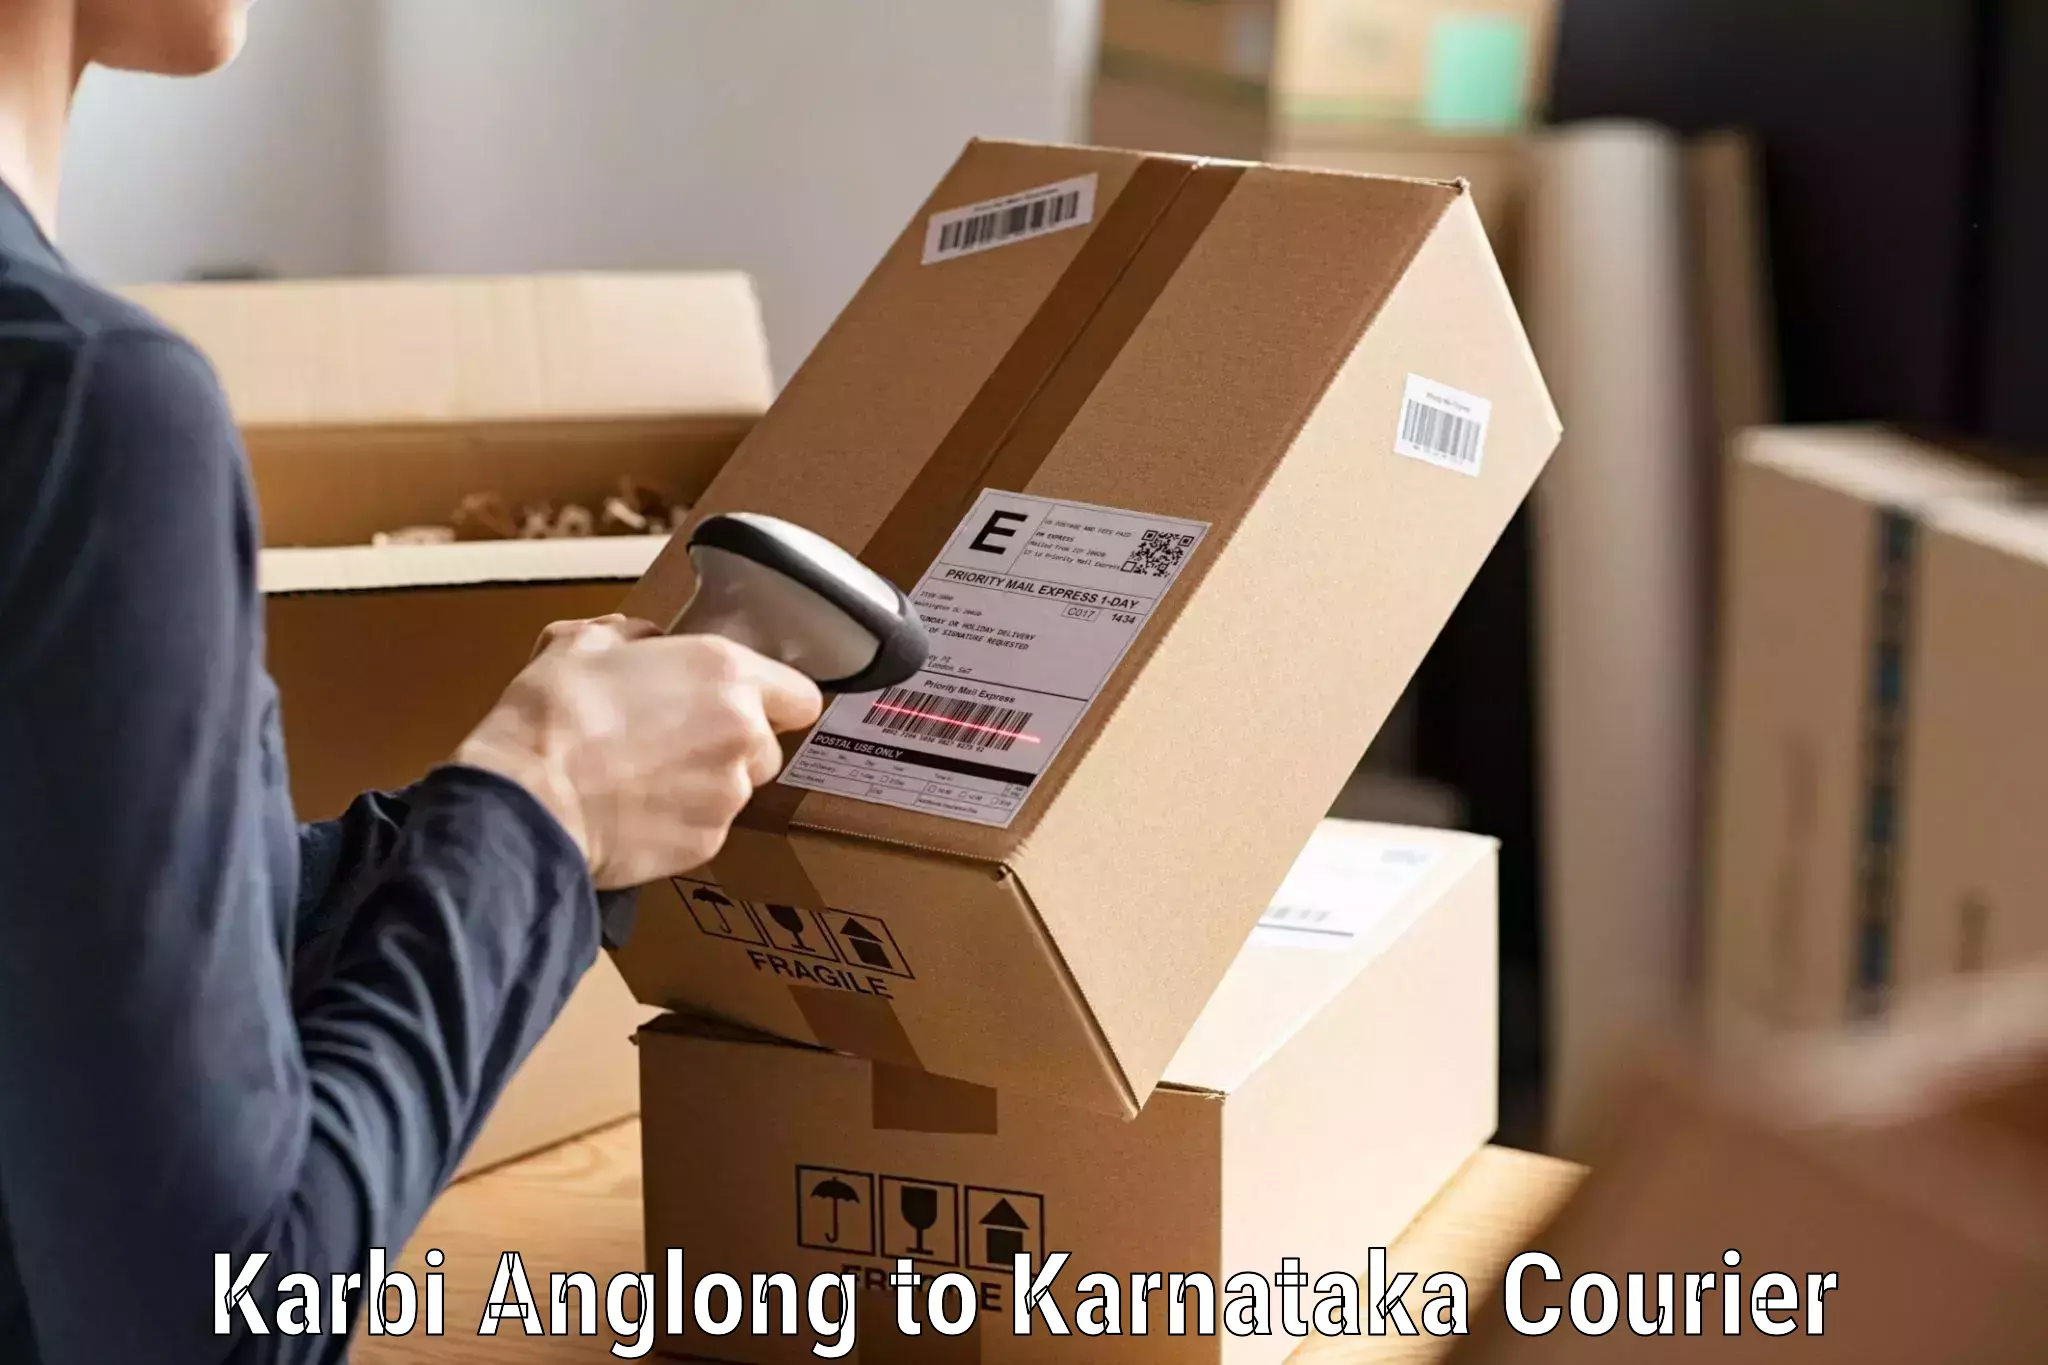 Comprehensive parcel tracking Karbi Anglong to Challakere